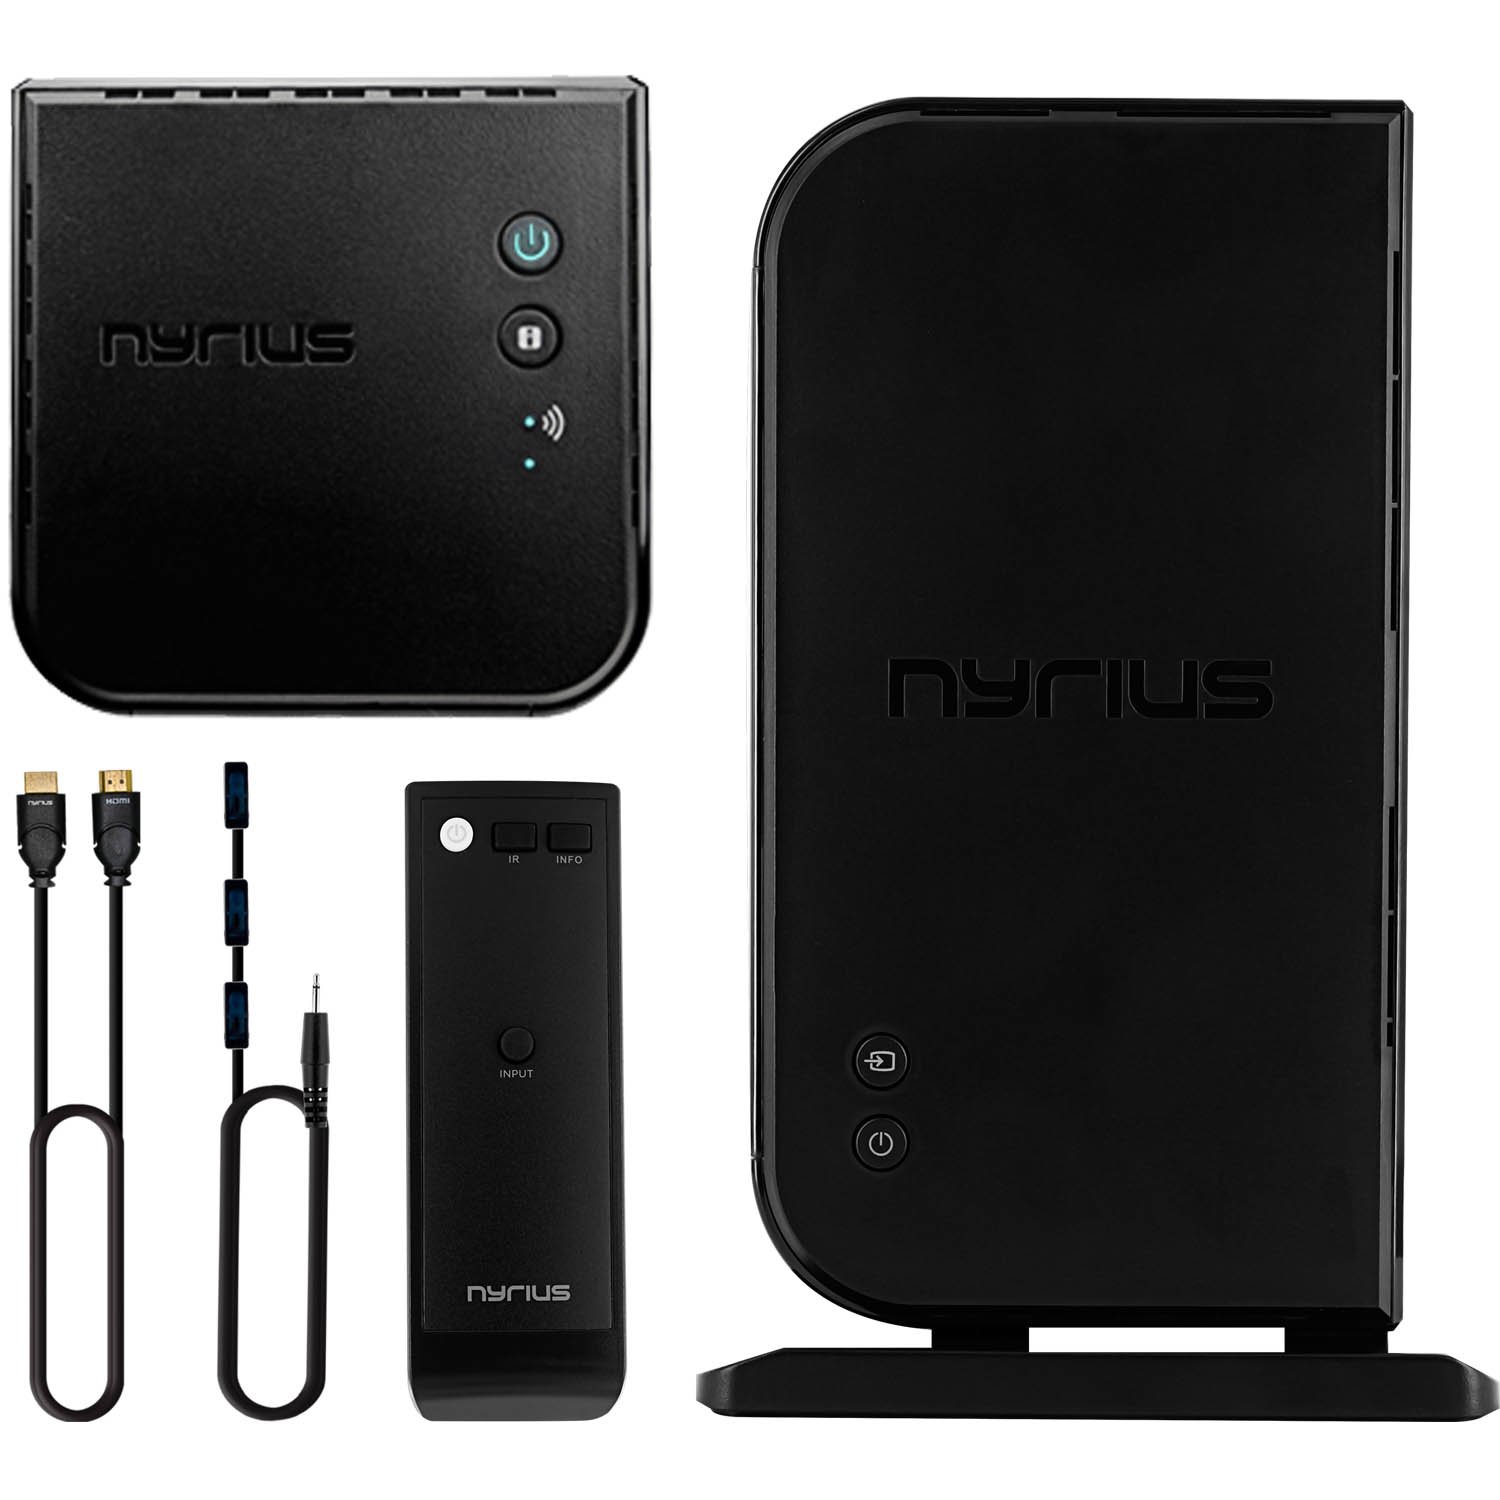 Nyrius Aries Home+ Wireless HDMI 2X Input Transmitter & Receiver for Streaming HD 1080p 3D Video and Digital Audio (NAVS502) - Bonus Additional Nyrius HDMI Cable Included